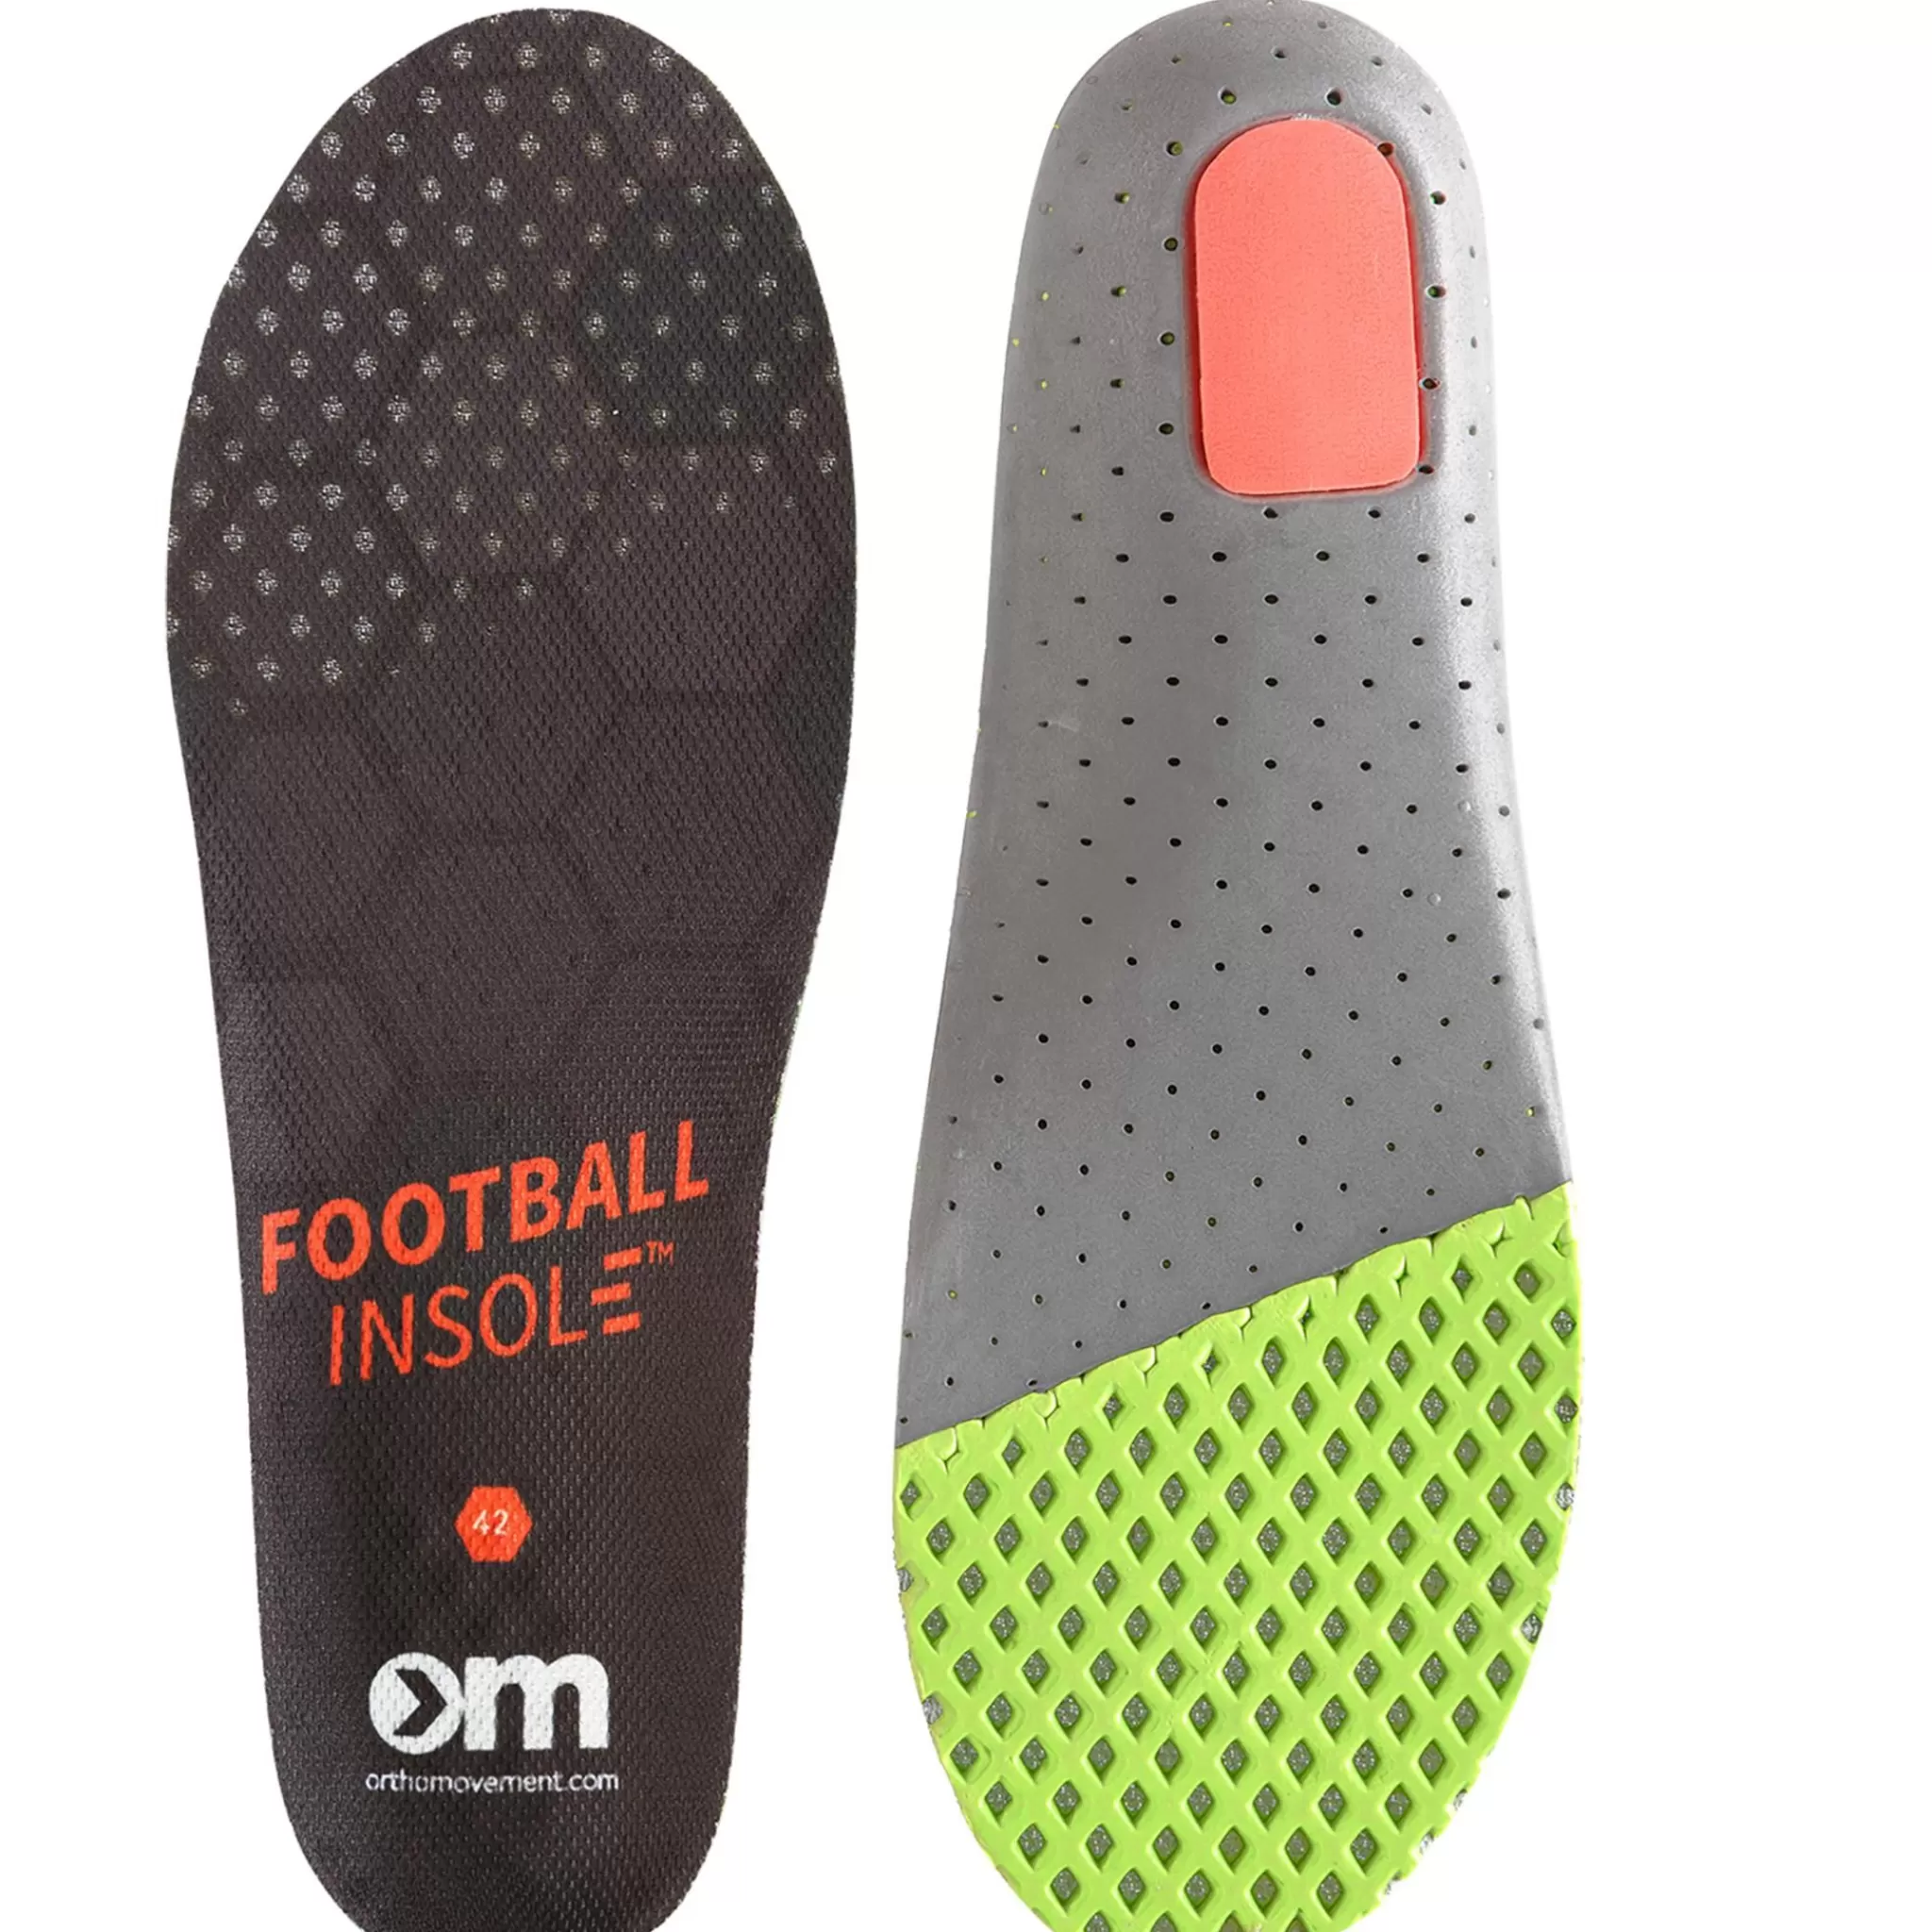 Discount Ortho Movement Football Insole, Innersale